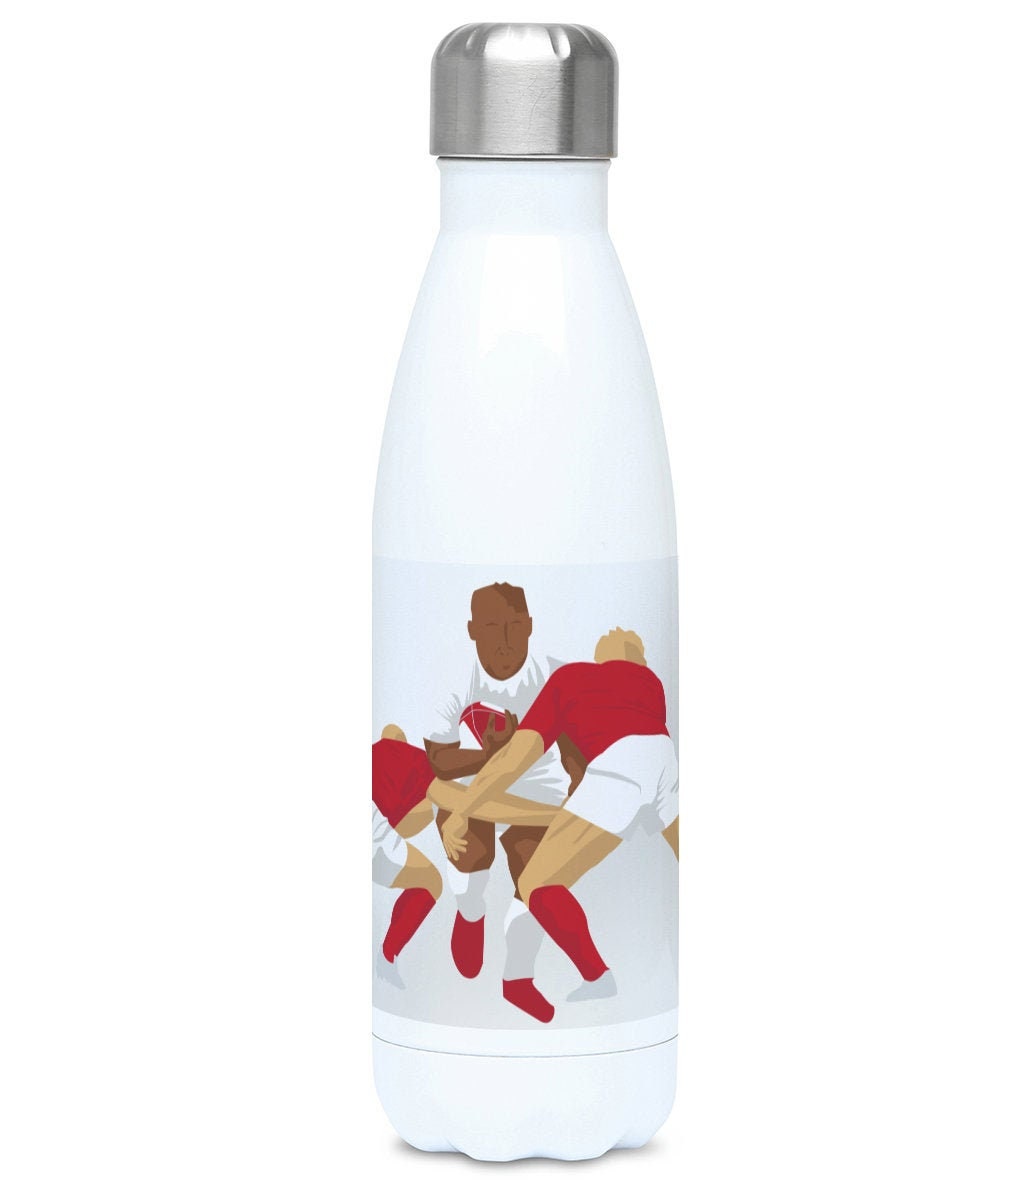 GOURDE PERSONNALISABLE 700 ml / 900 ml - Only Rugby